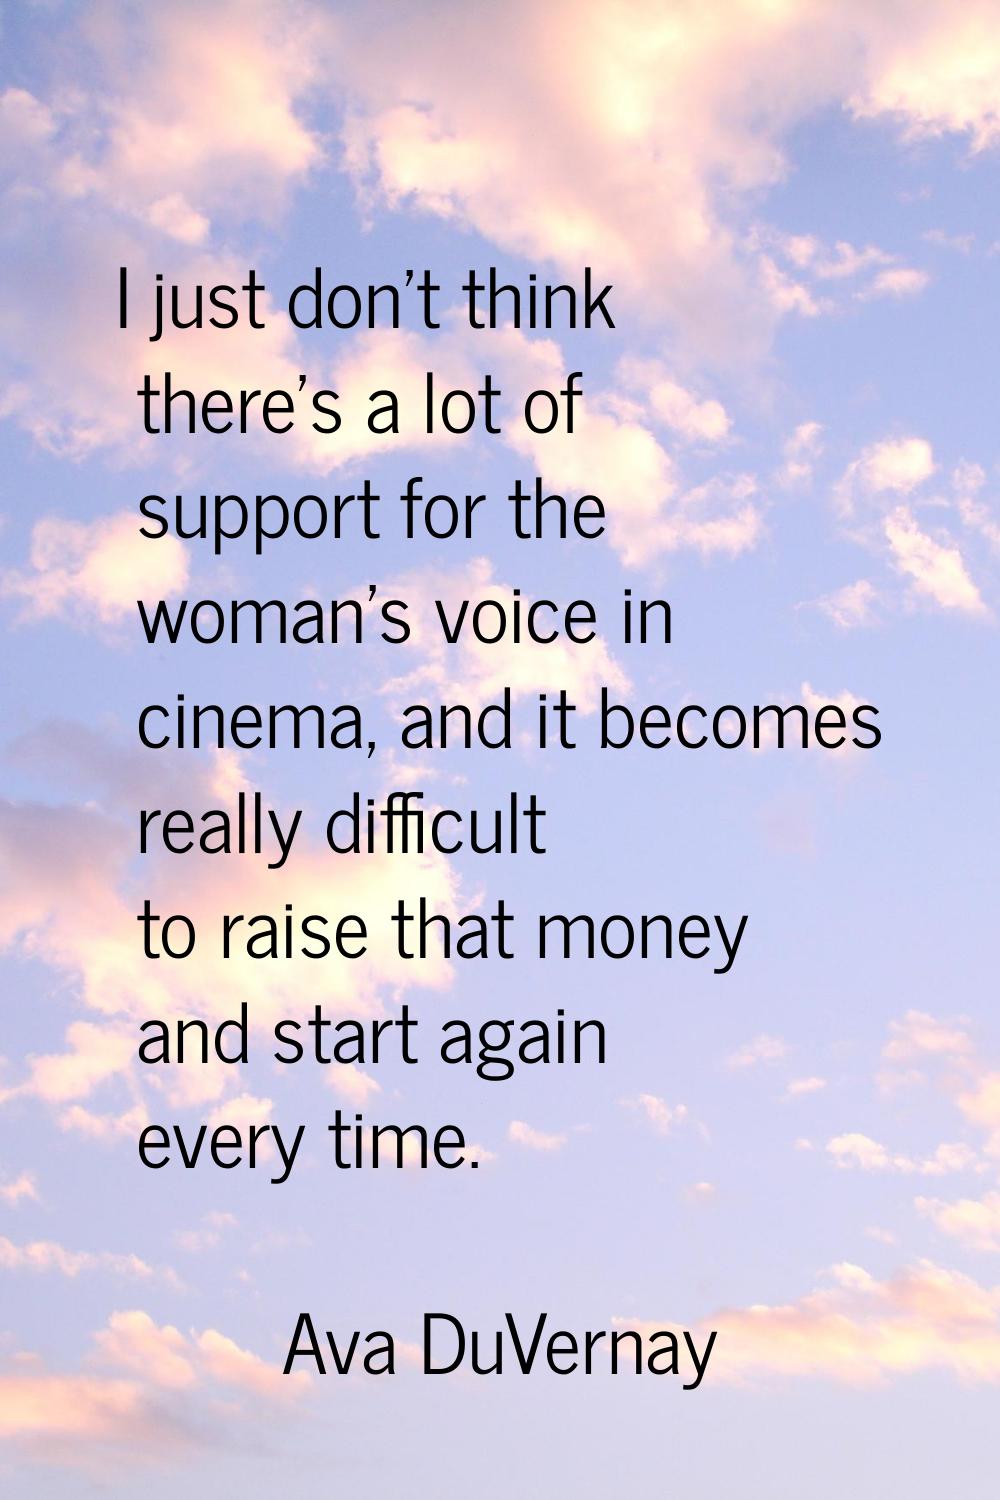 I just don't think there's a lot of support for the woman's voice in cinema, and it becomes really 